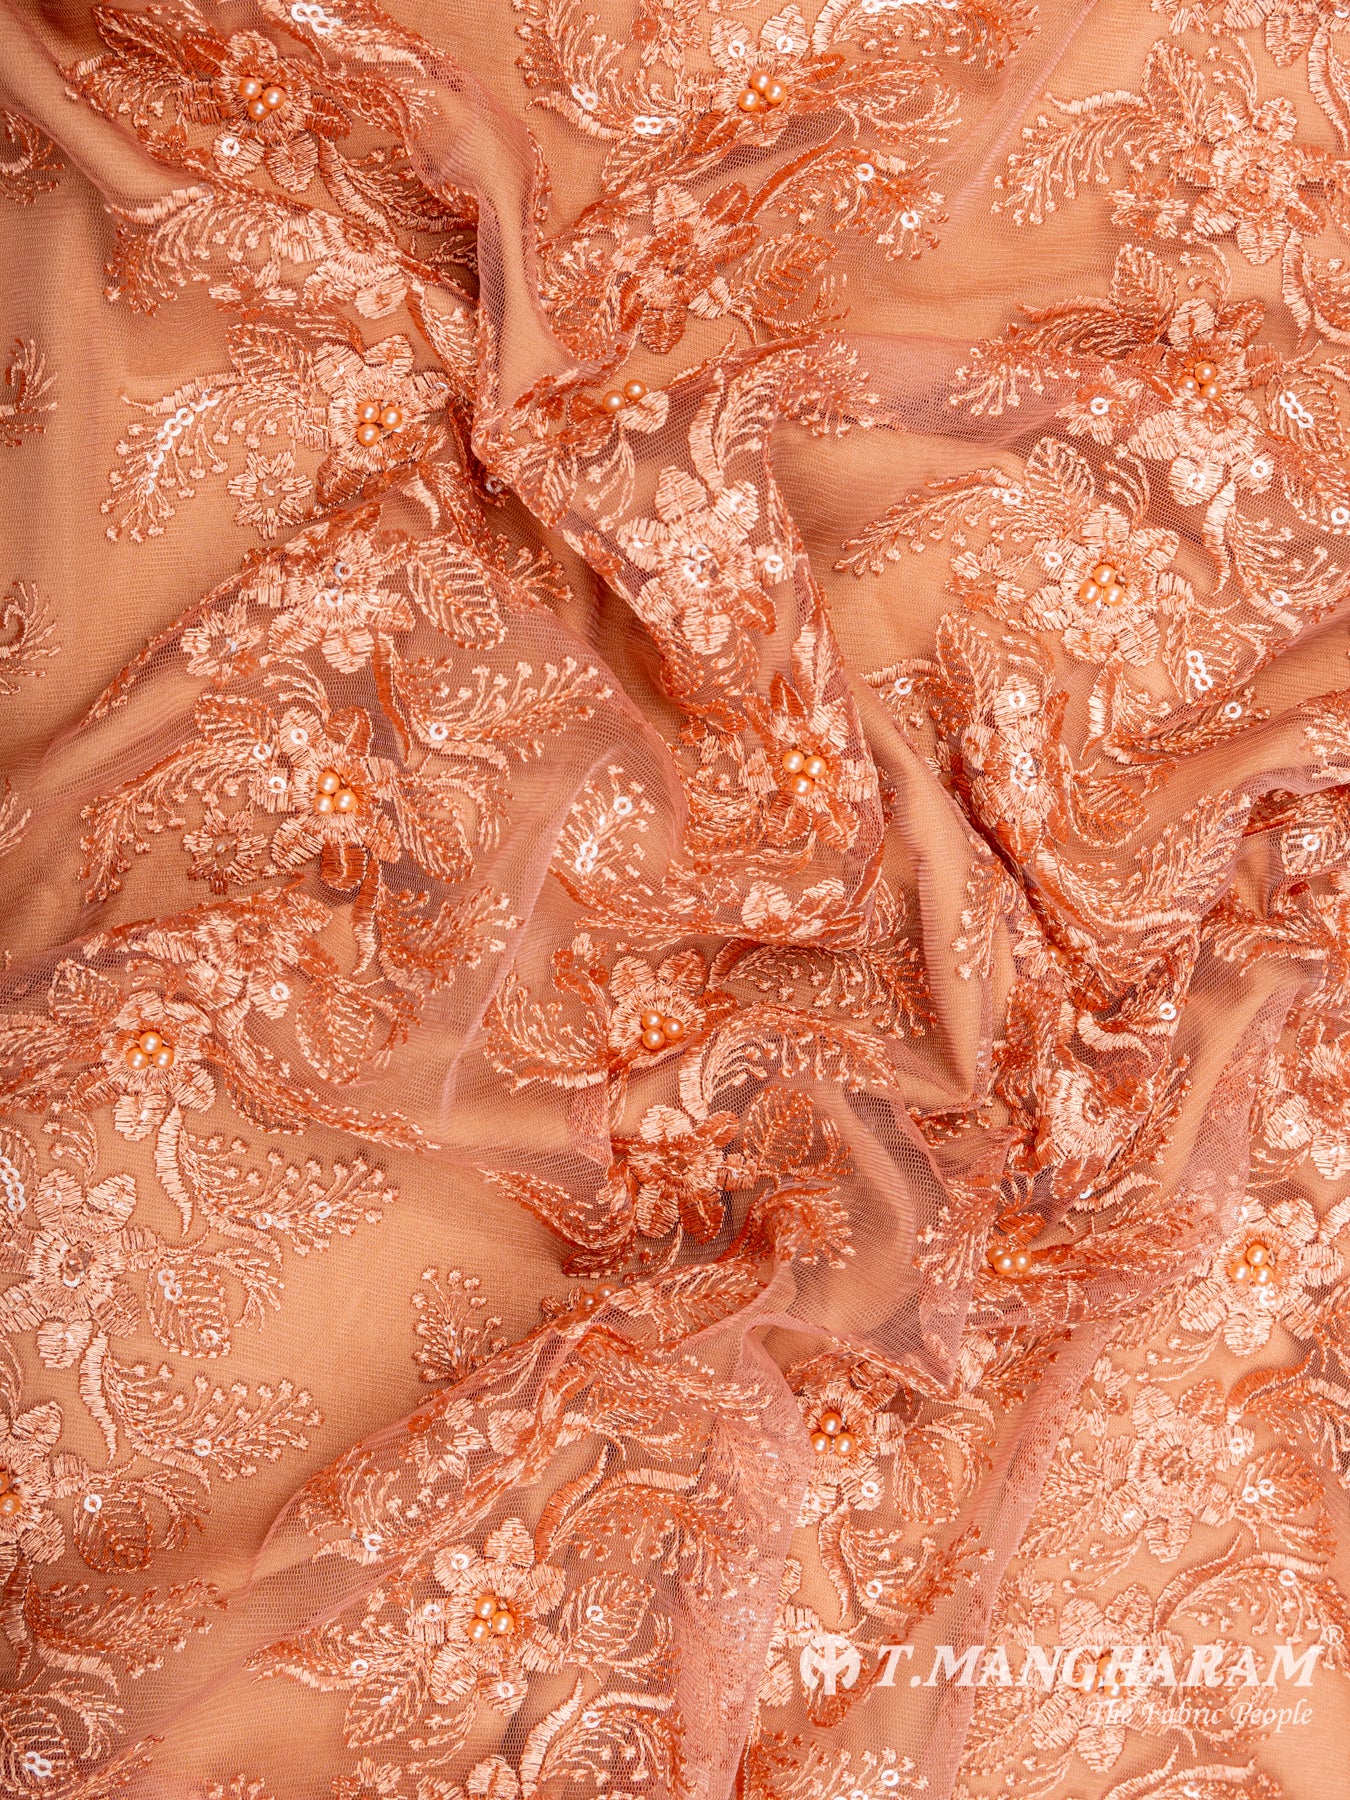 Peach Net Embroidery Fabric - EC6520 view-4